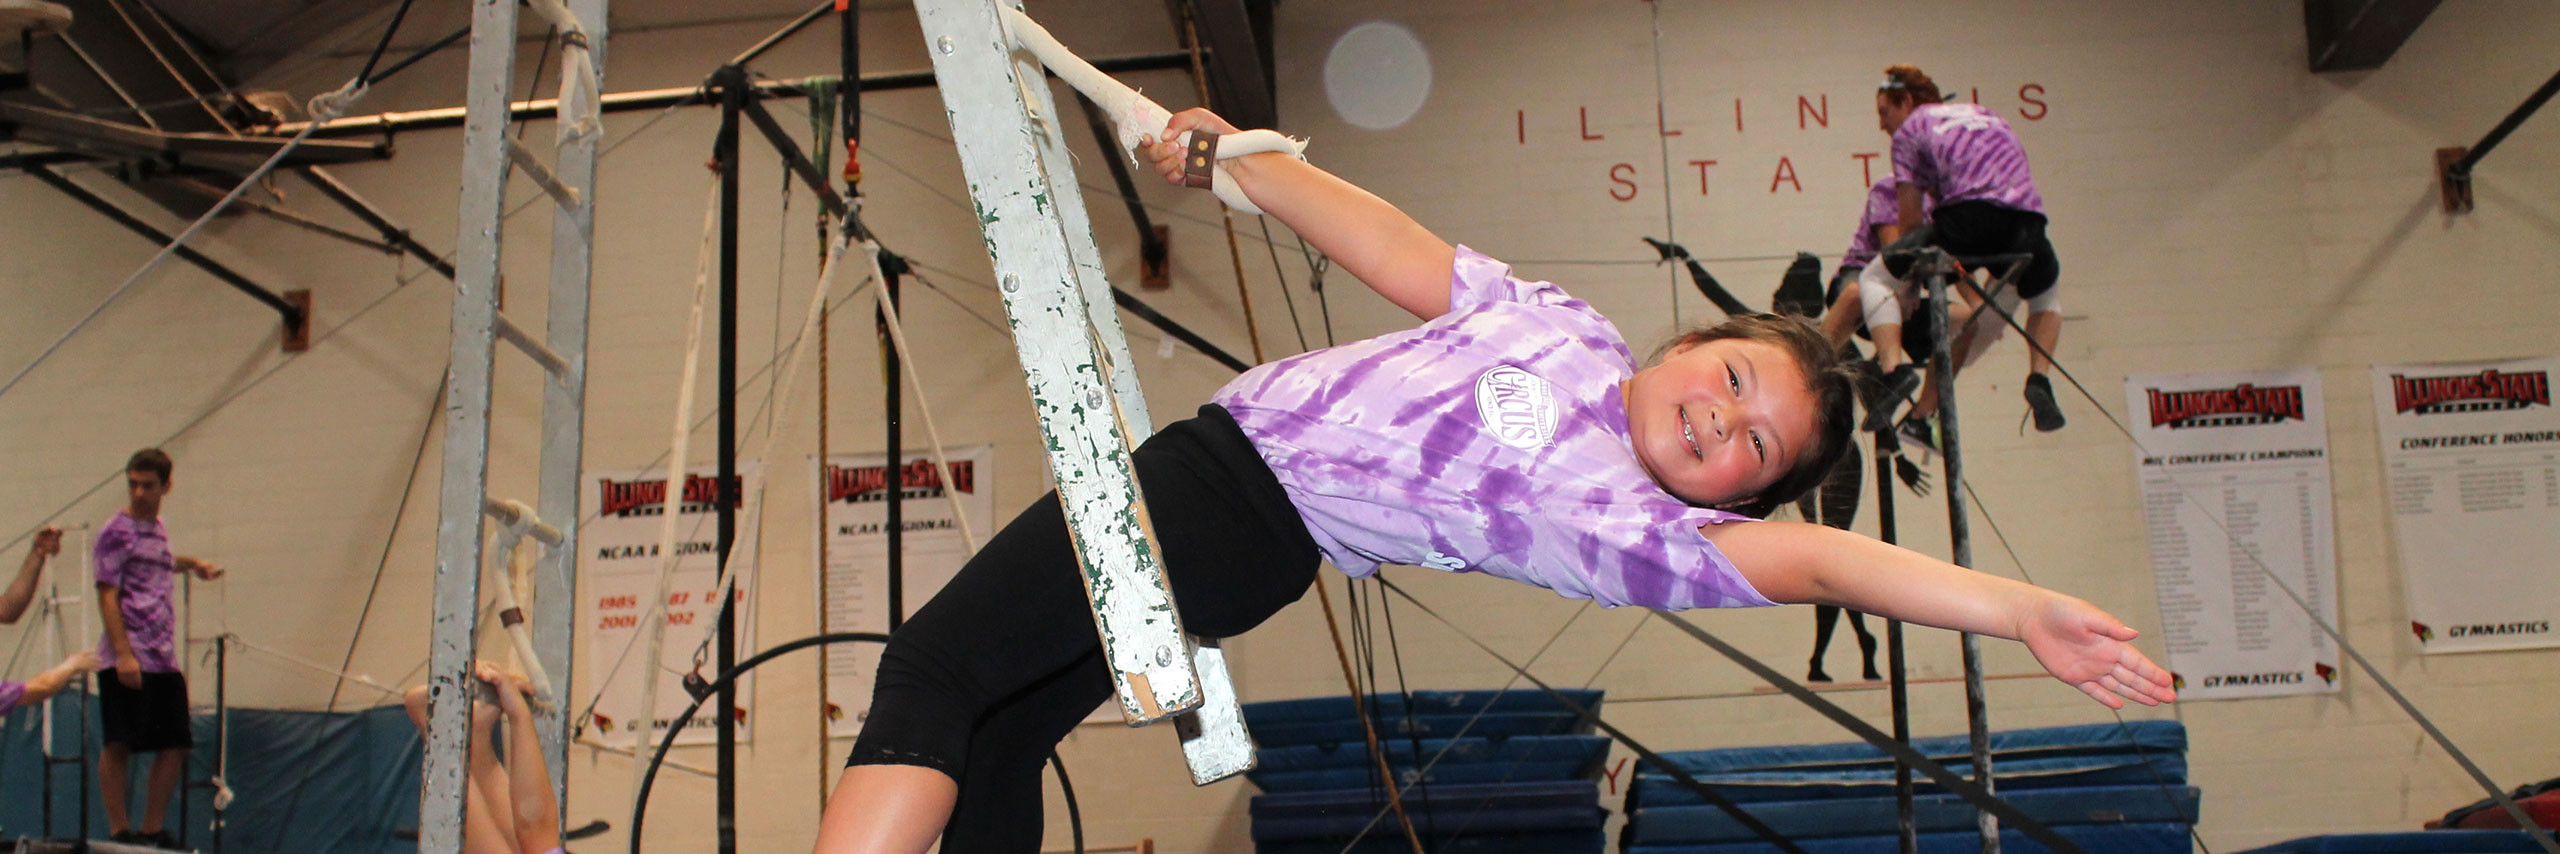 Little girl on a flying trapeze.